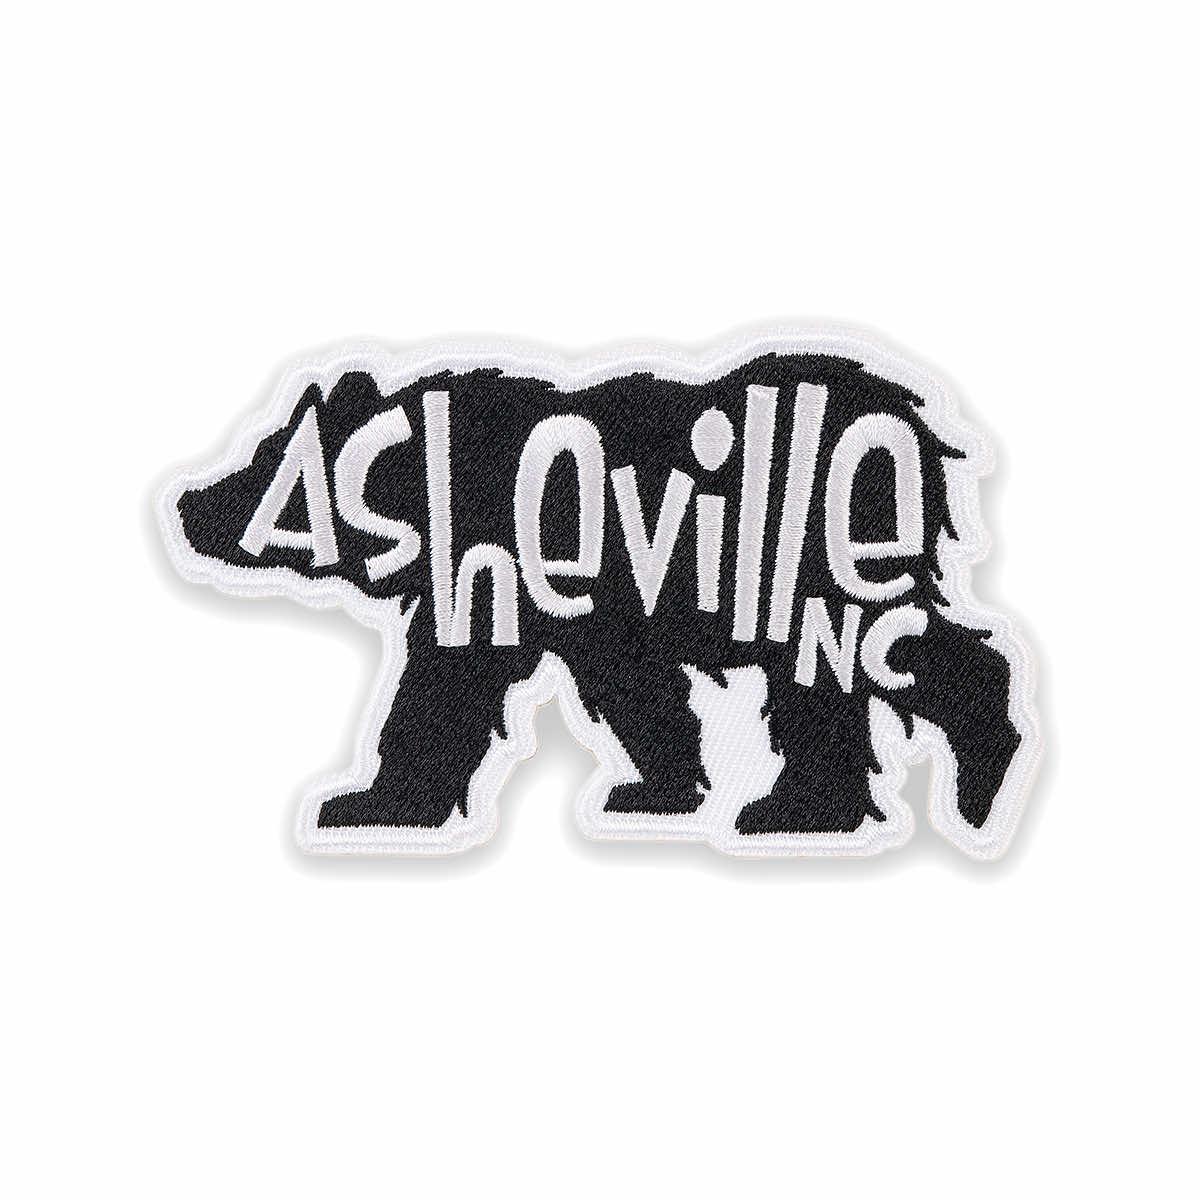 Asheville Bear Embroidered Patch